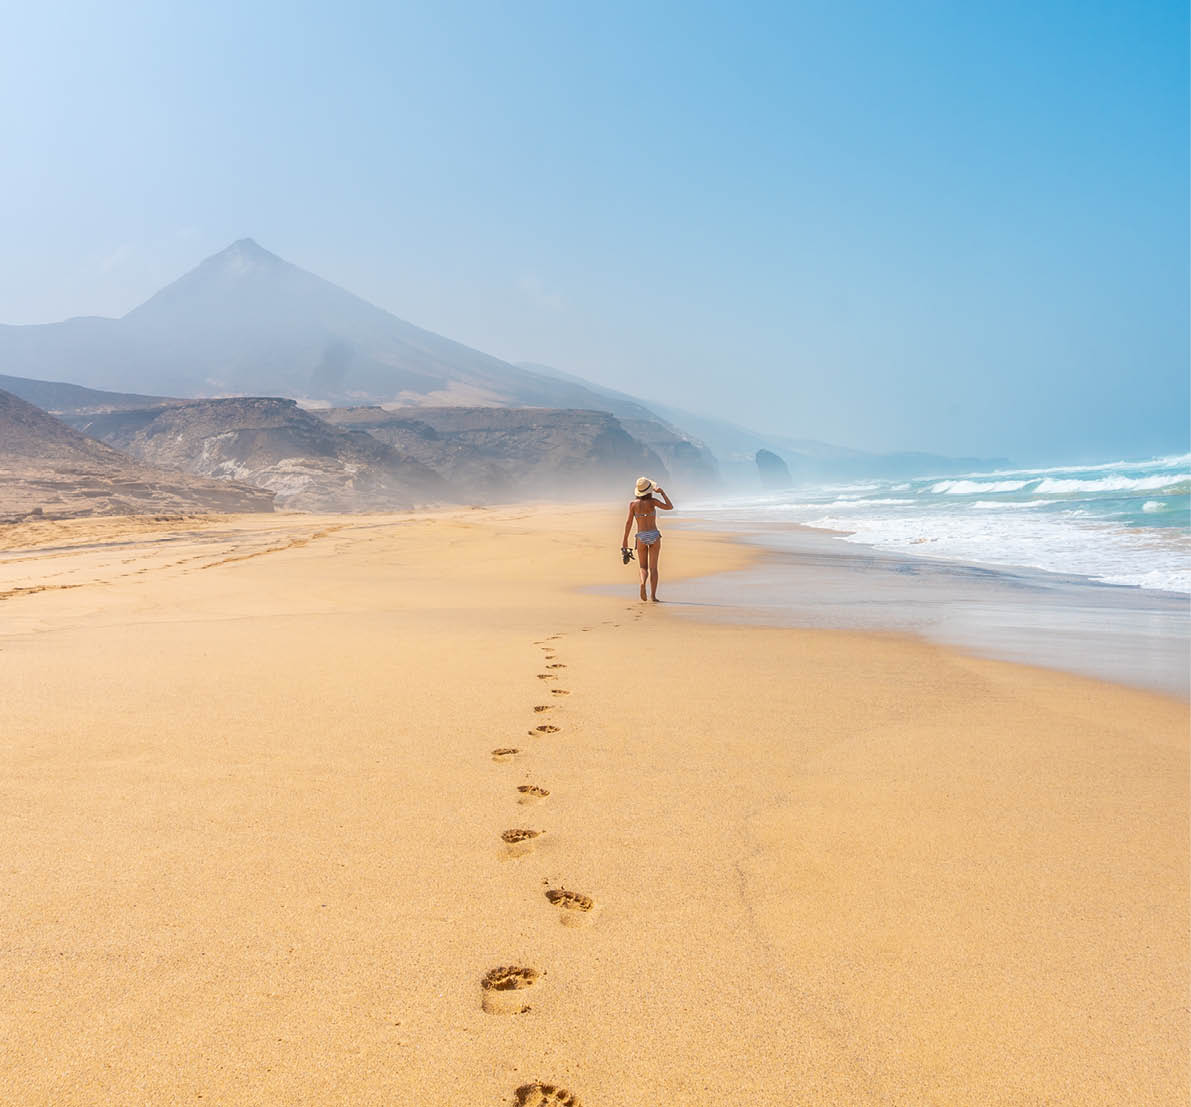 A young tourist walking alone on the wild beach Cofete in the natural park of Jandia, Barlovento coast, south of Fuerteventura, Canary Islands. Spain